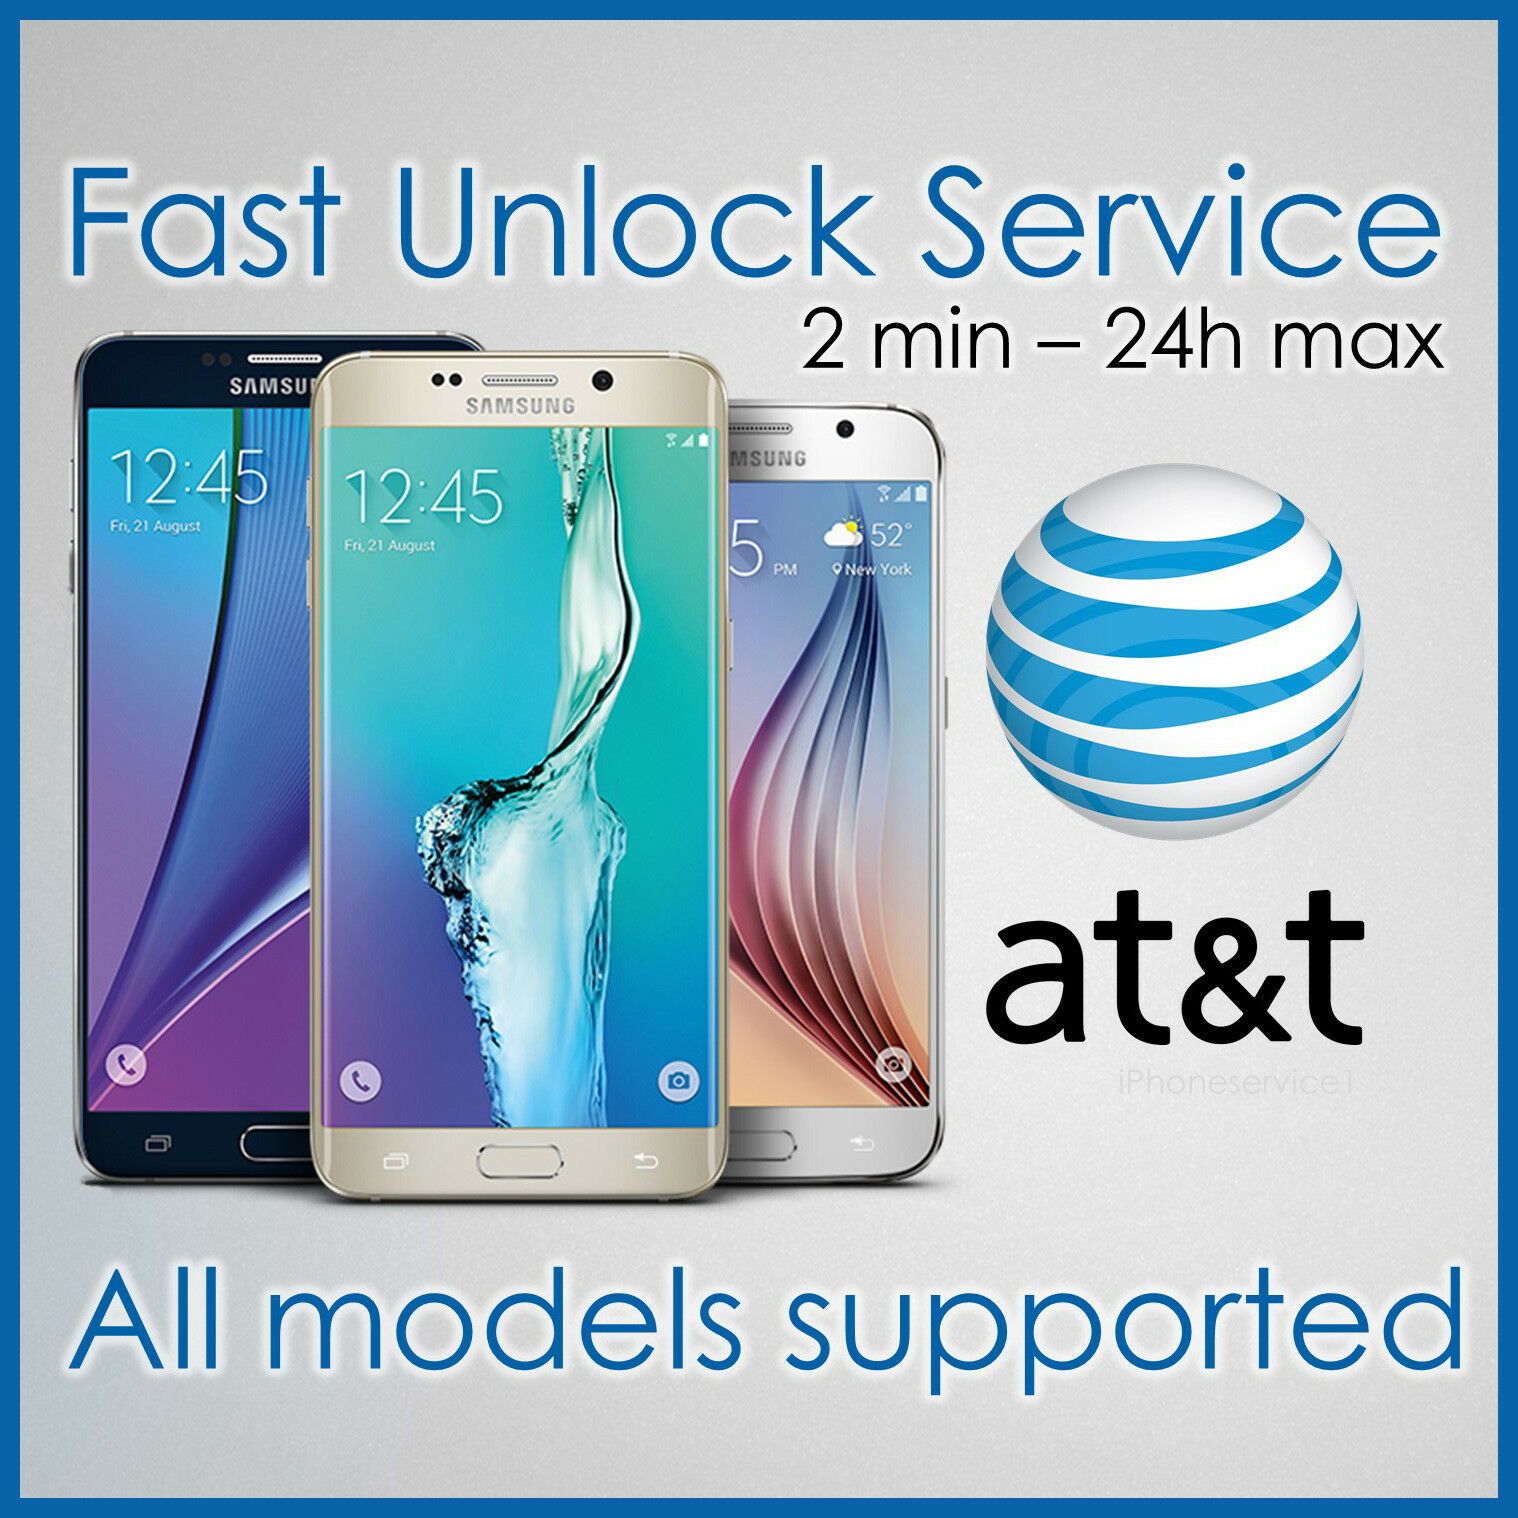 At&t Att Unlock Code Service For Samsung Galaxy S10 S9 S8 S7 S6 S5 Notes Active